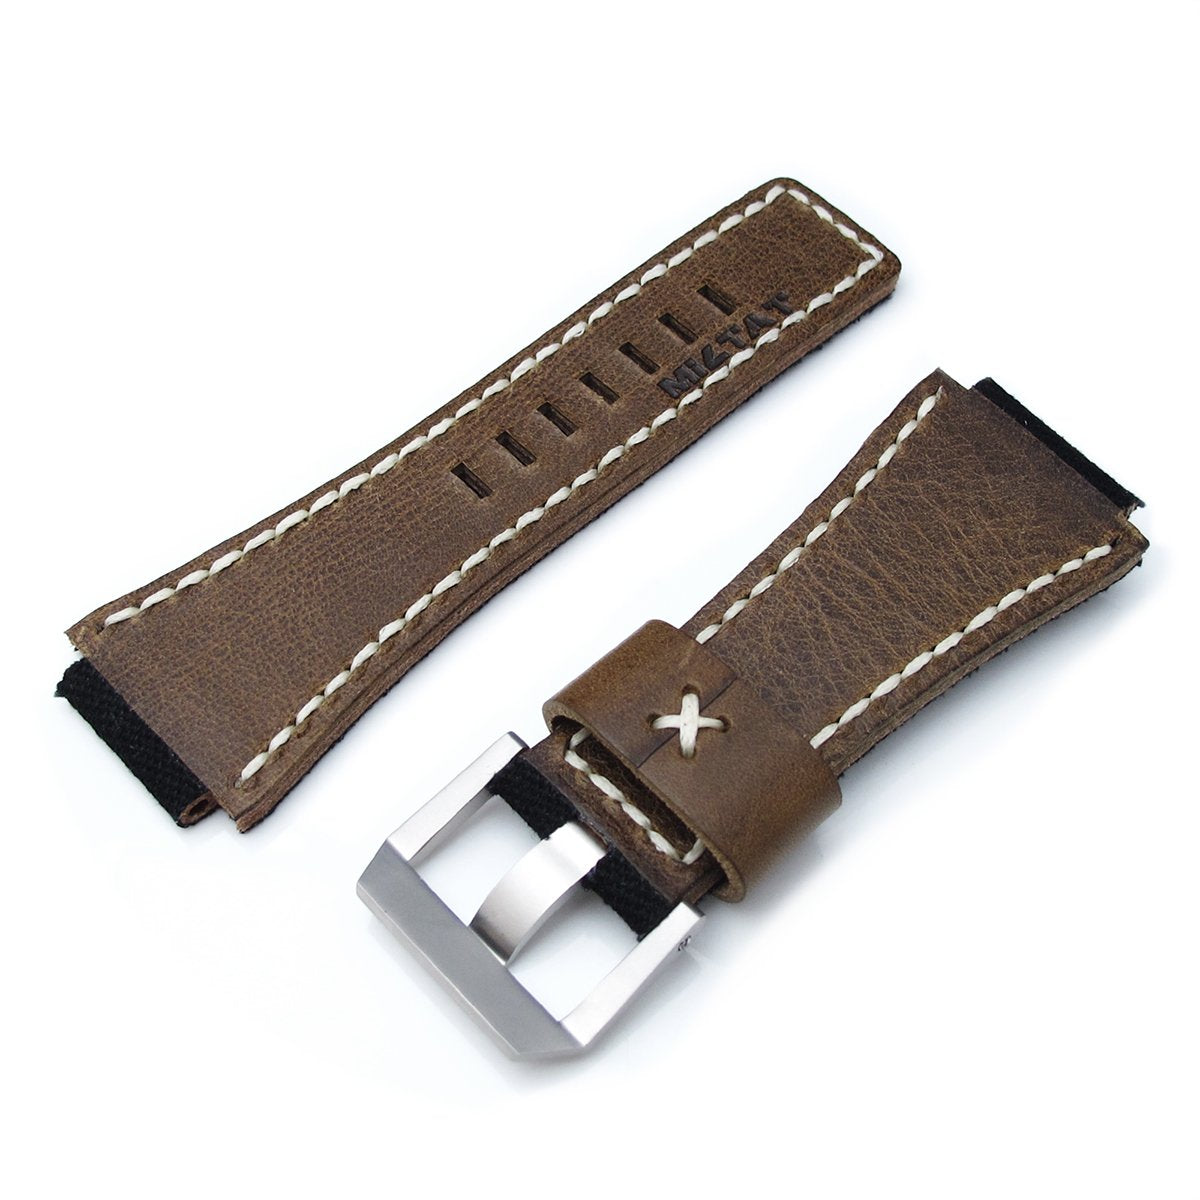 MiLTAT Black Canvas Bell & Ross BR01 Type Replacement Watch Strap Beige Wax Stitching Strapcode Watch Bands